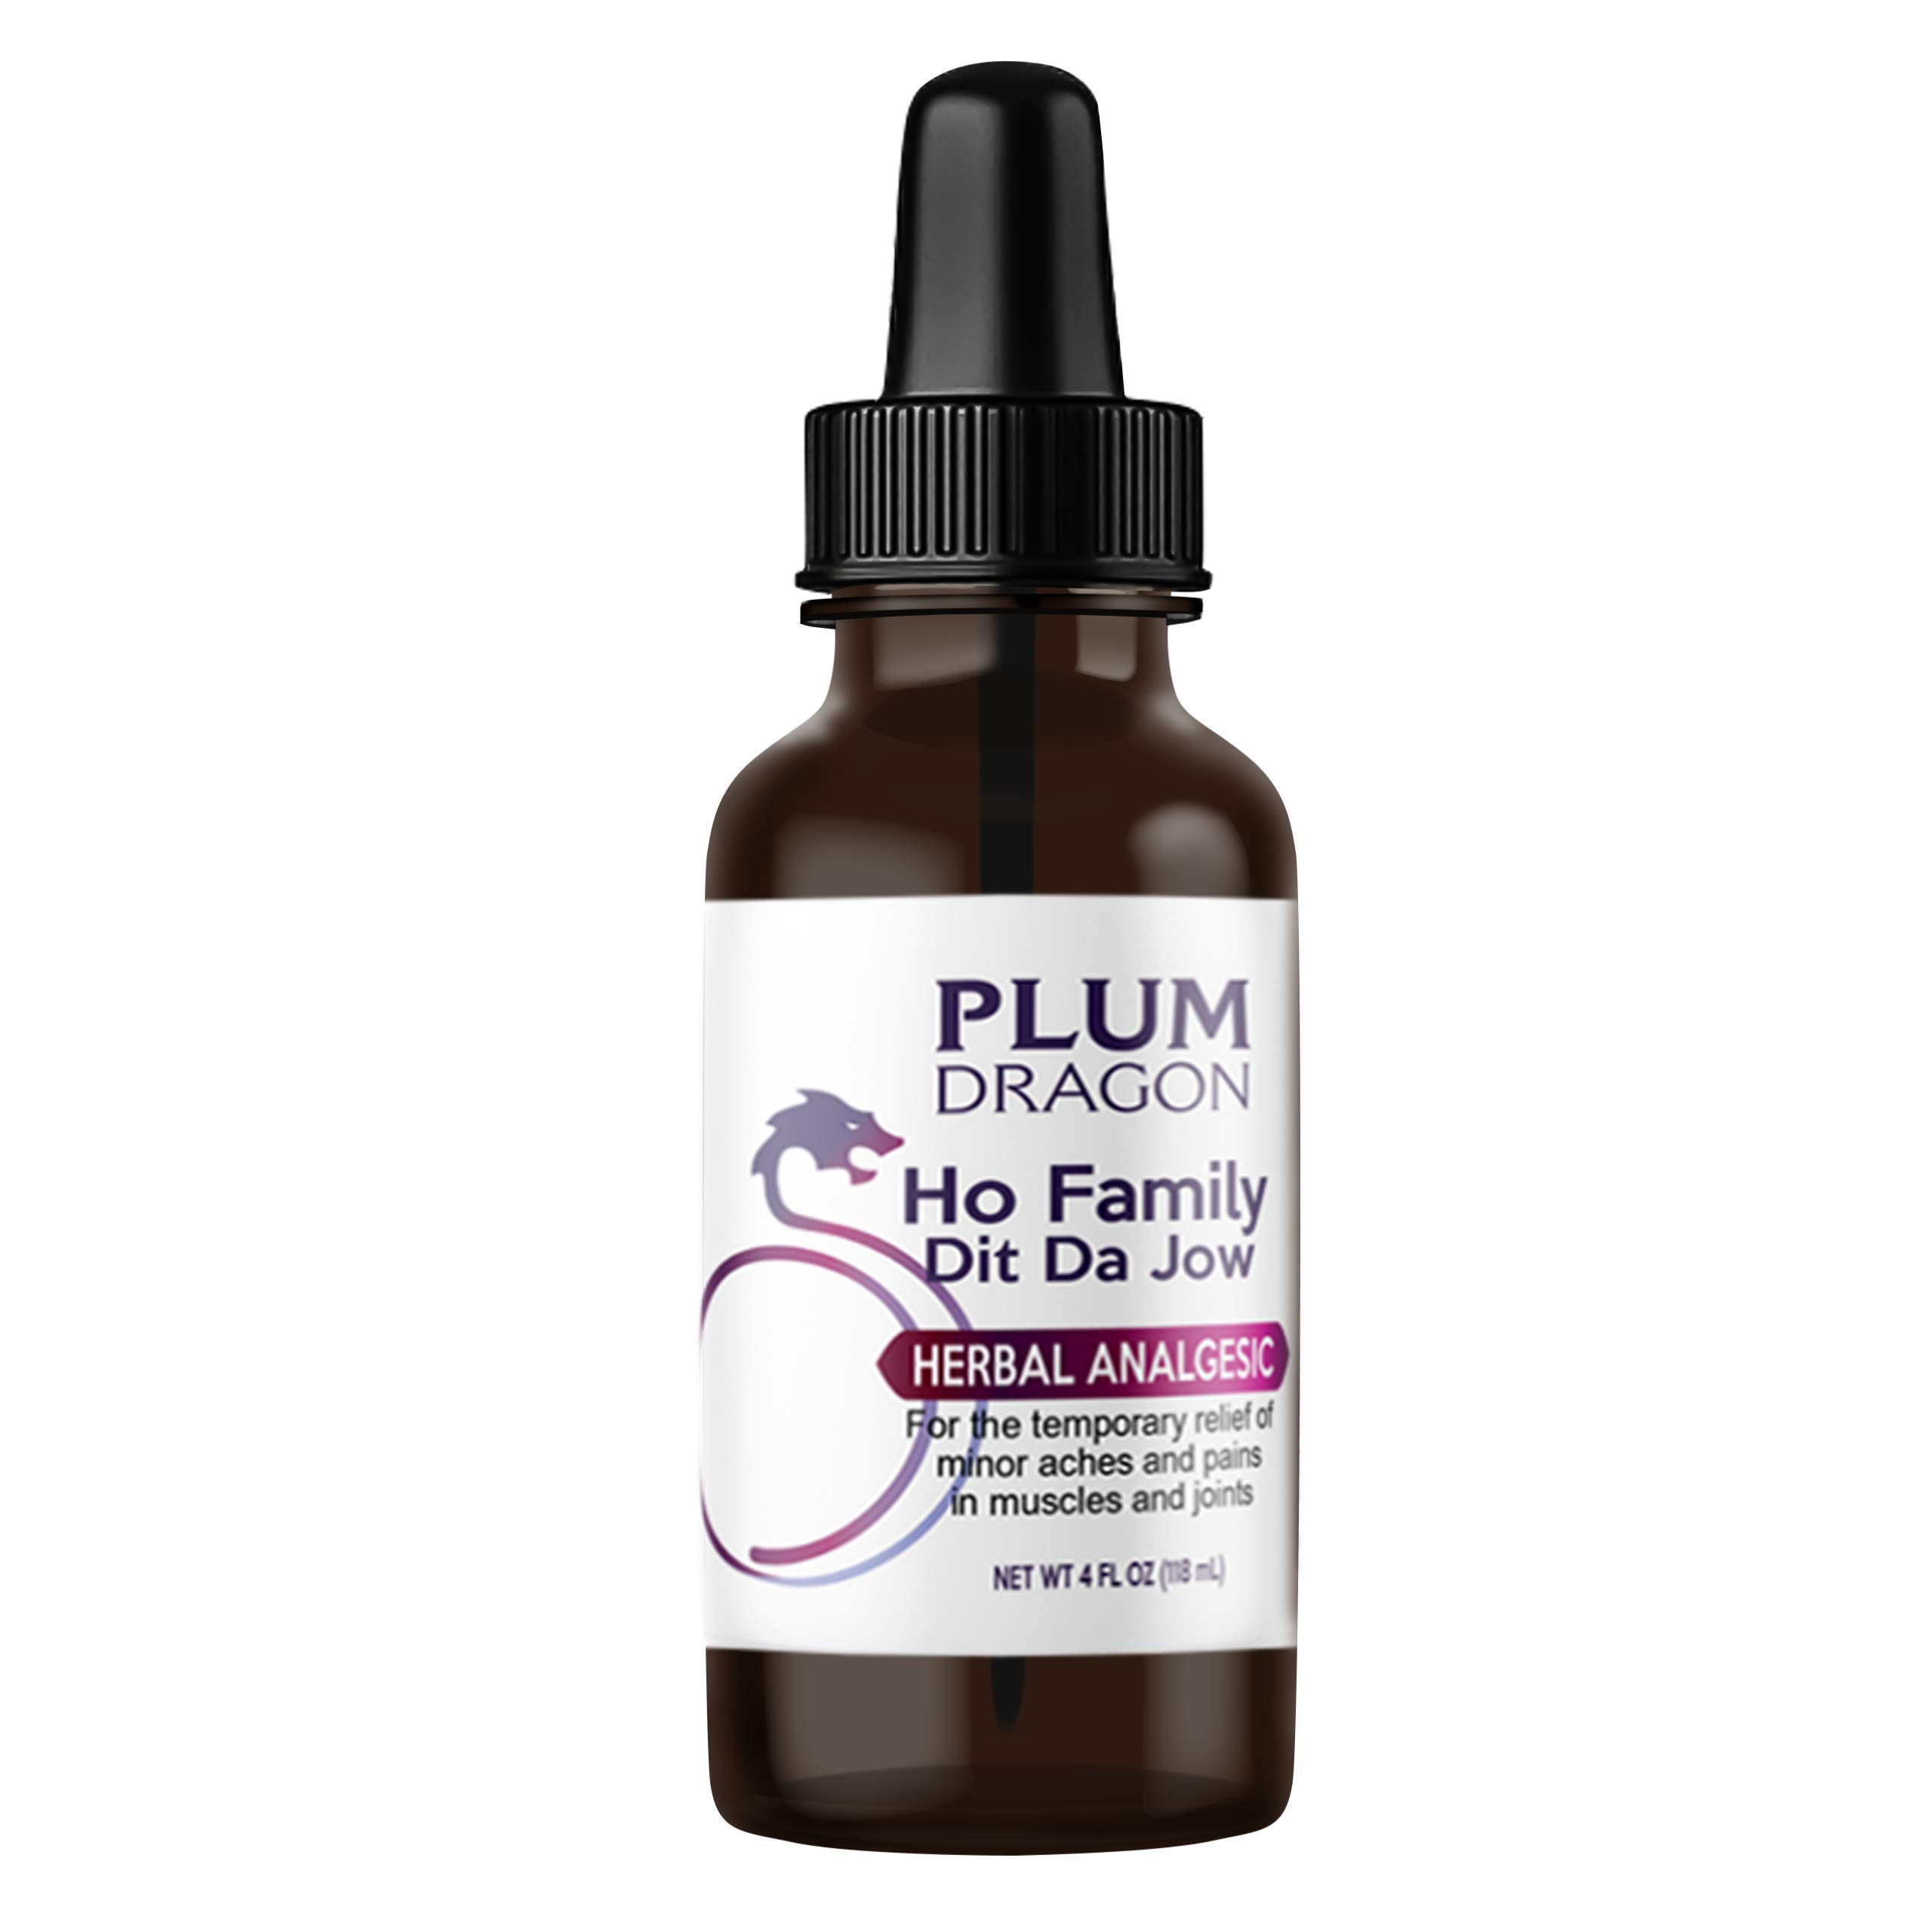 Book Cover Plum Dragon Ho Family Dit Da Jow |Topical Analgesic| Traditional Chinese Dit Da Jow - 4 Oz